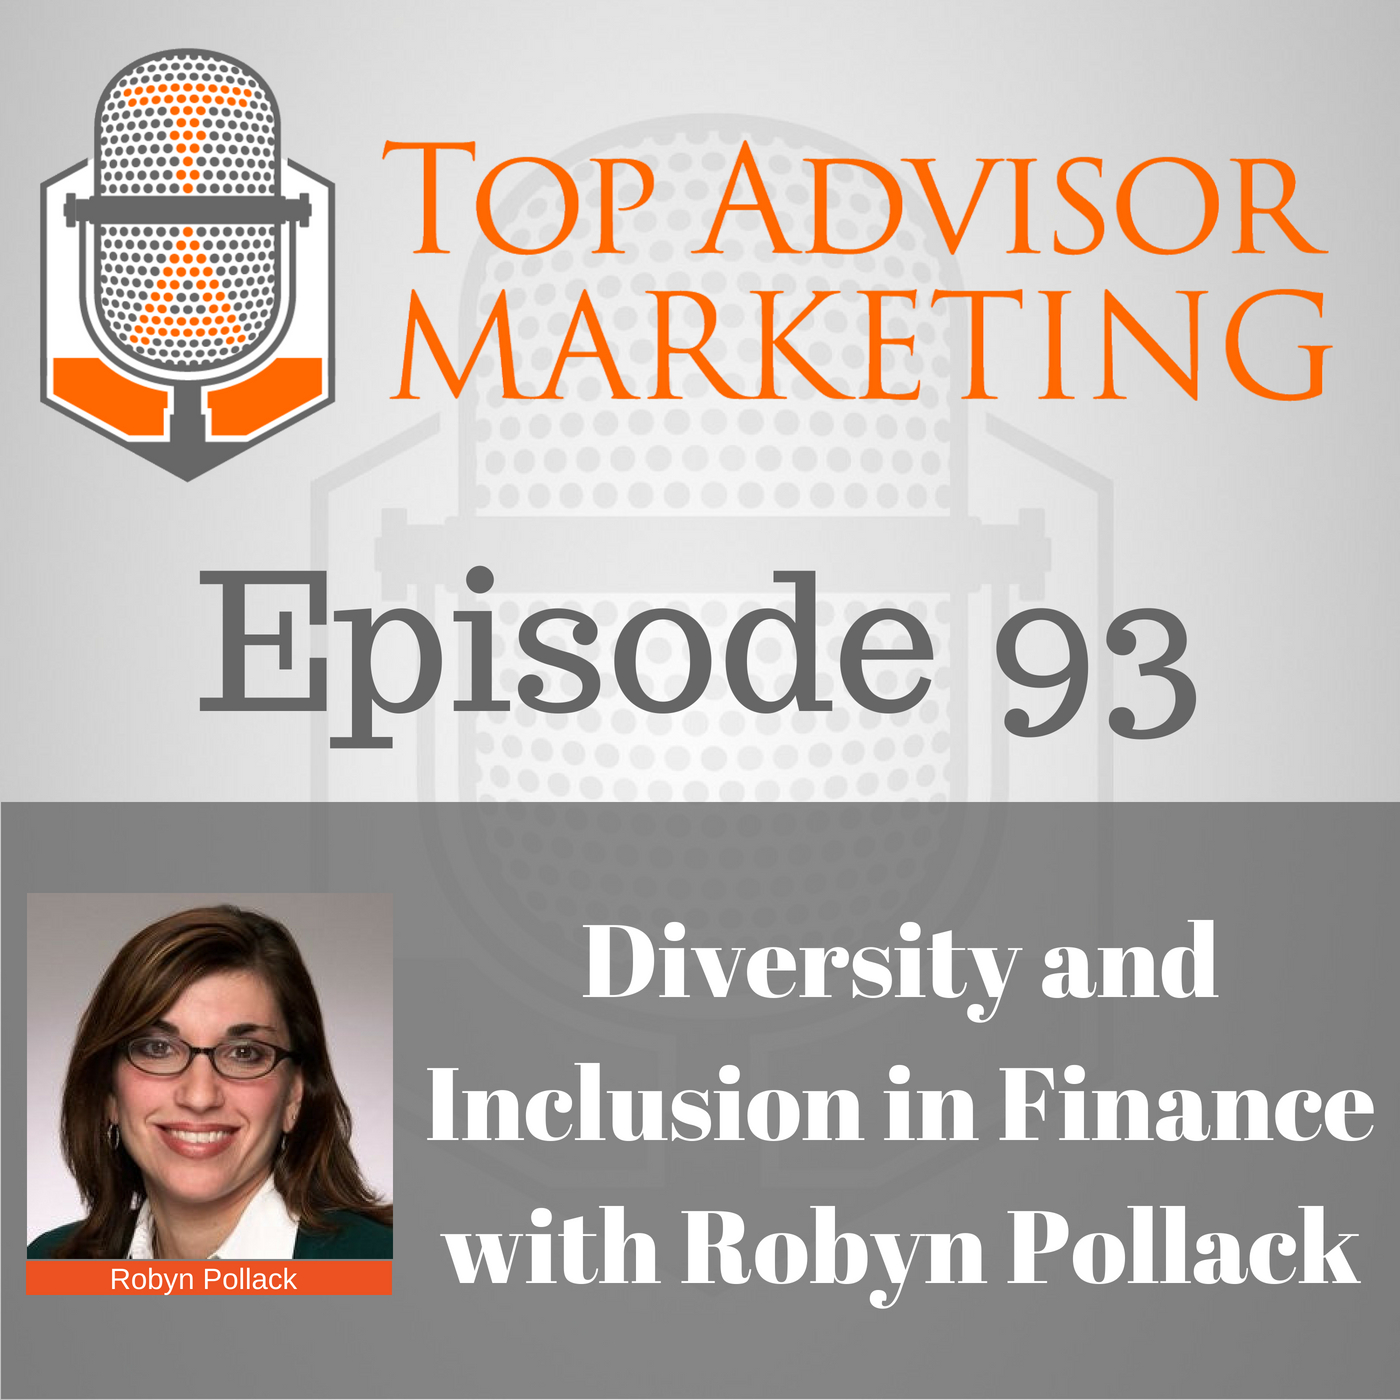 Episode 93 - Diversity and Inclusion in Finance with Robyn Pollack